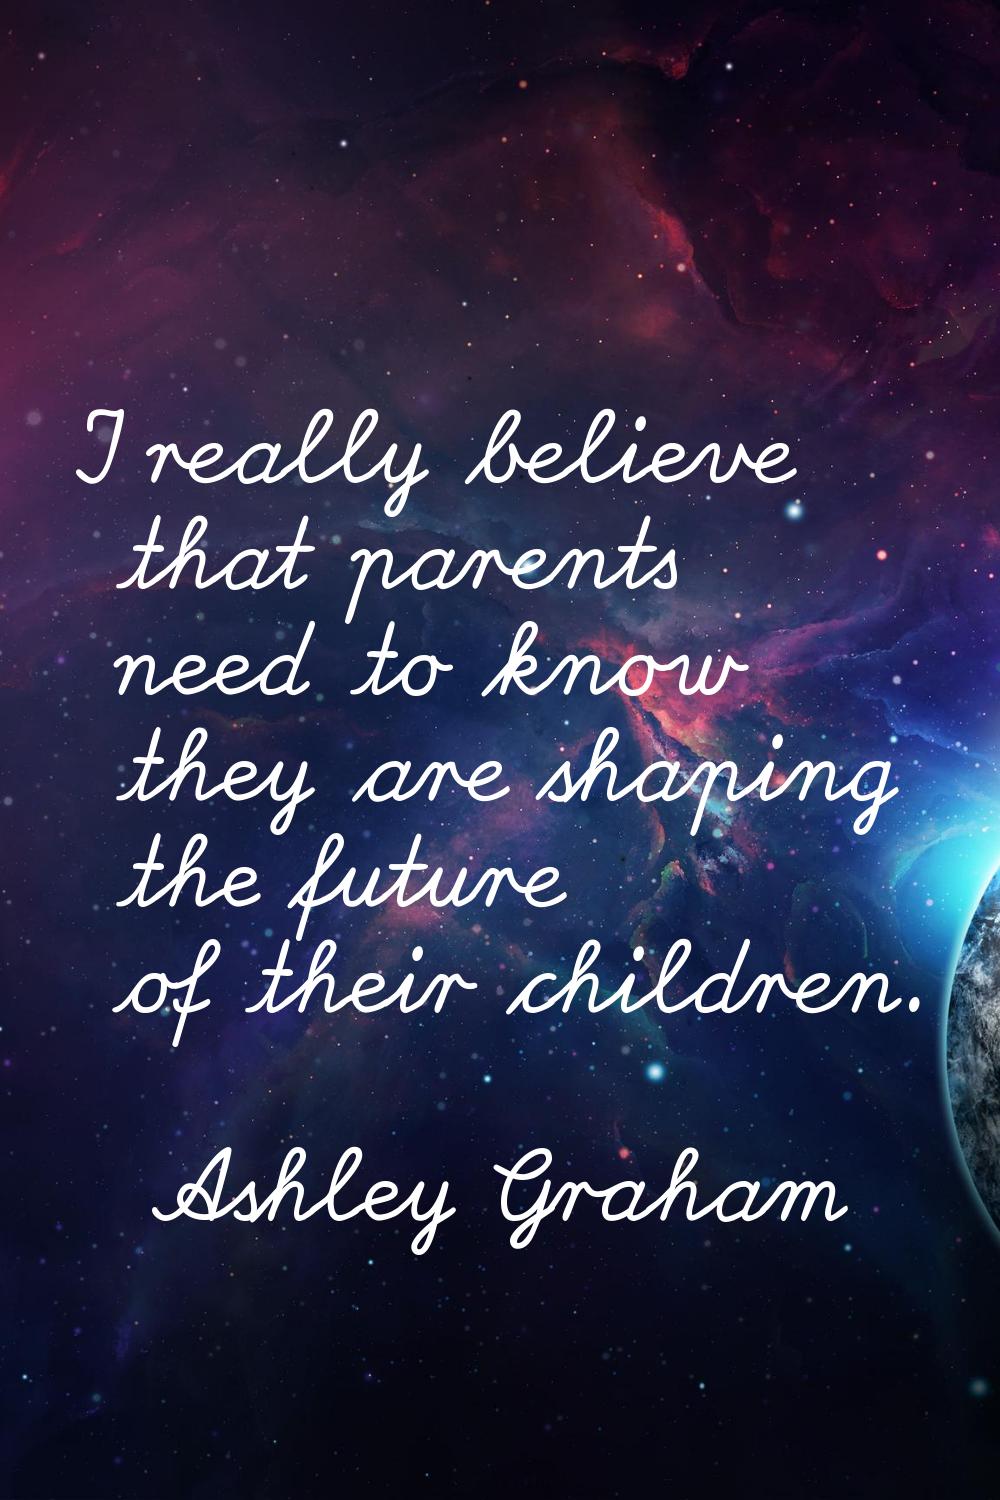 I really believe that parents need to know they are shaping the future of their children.